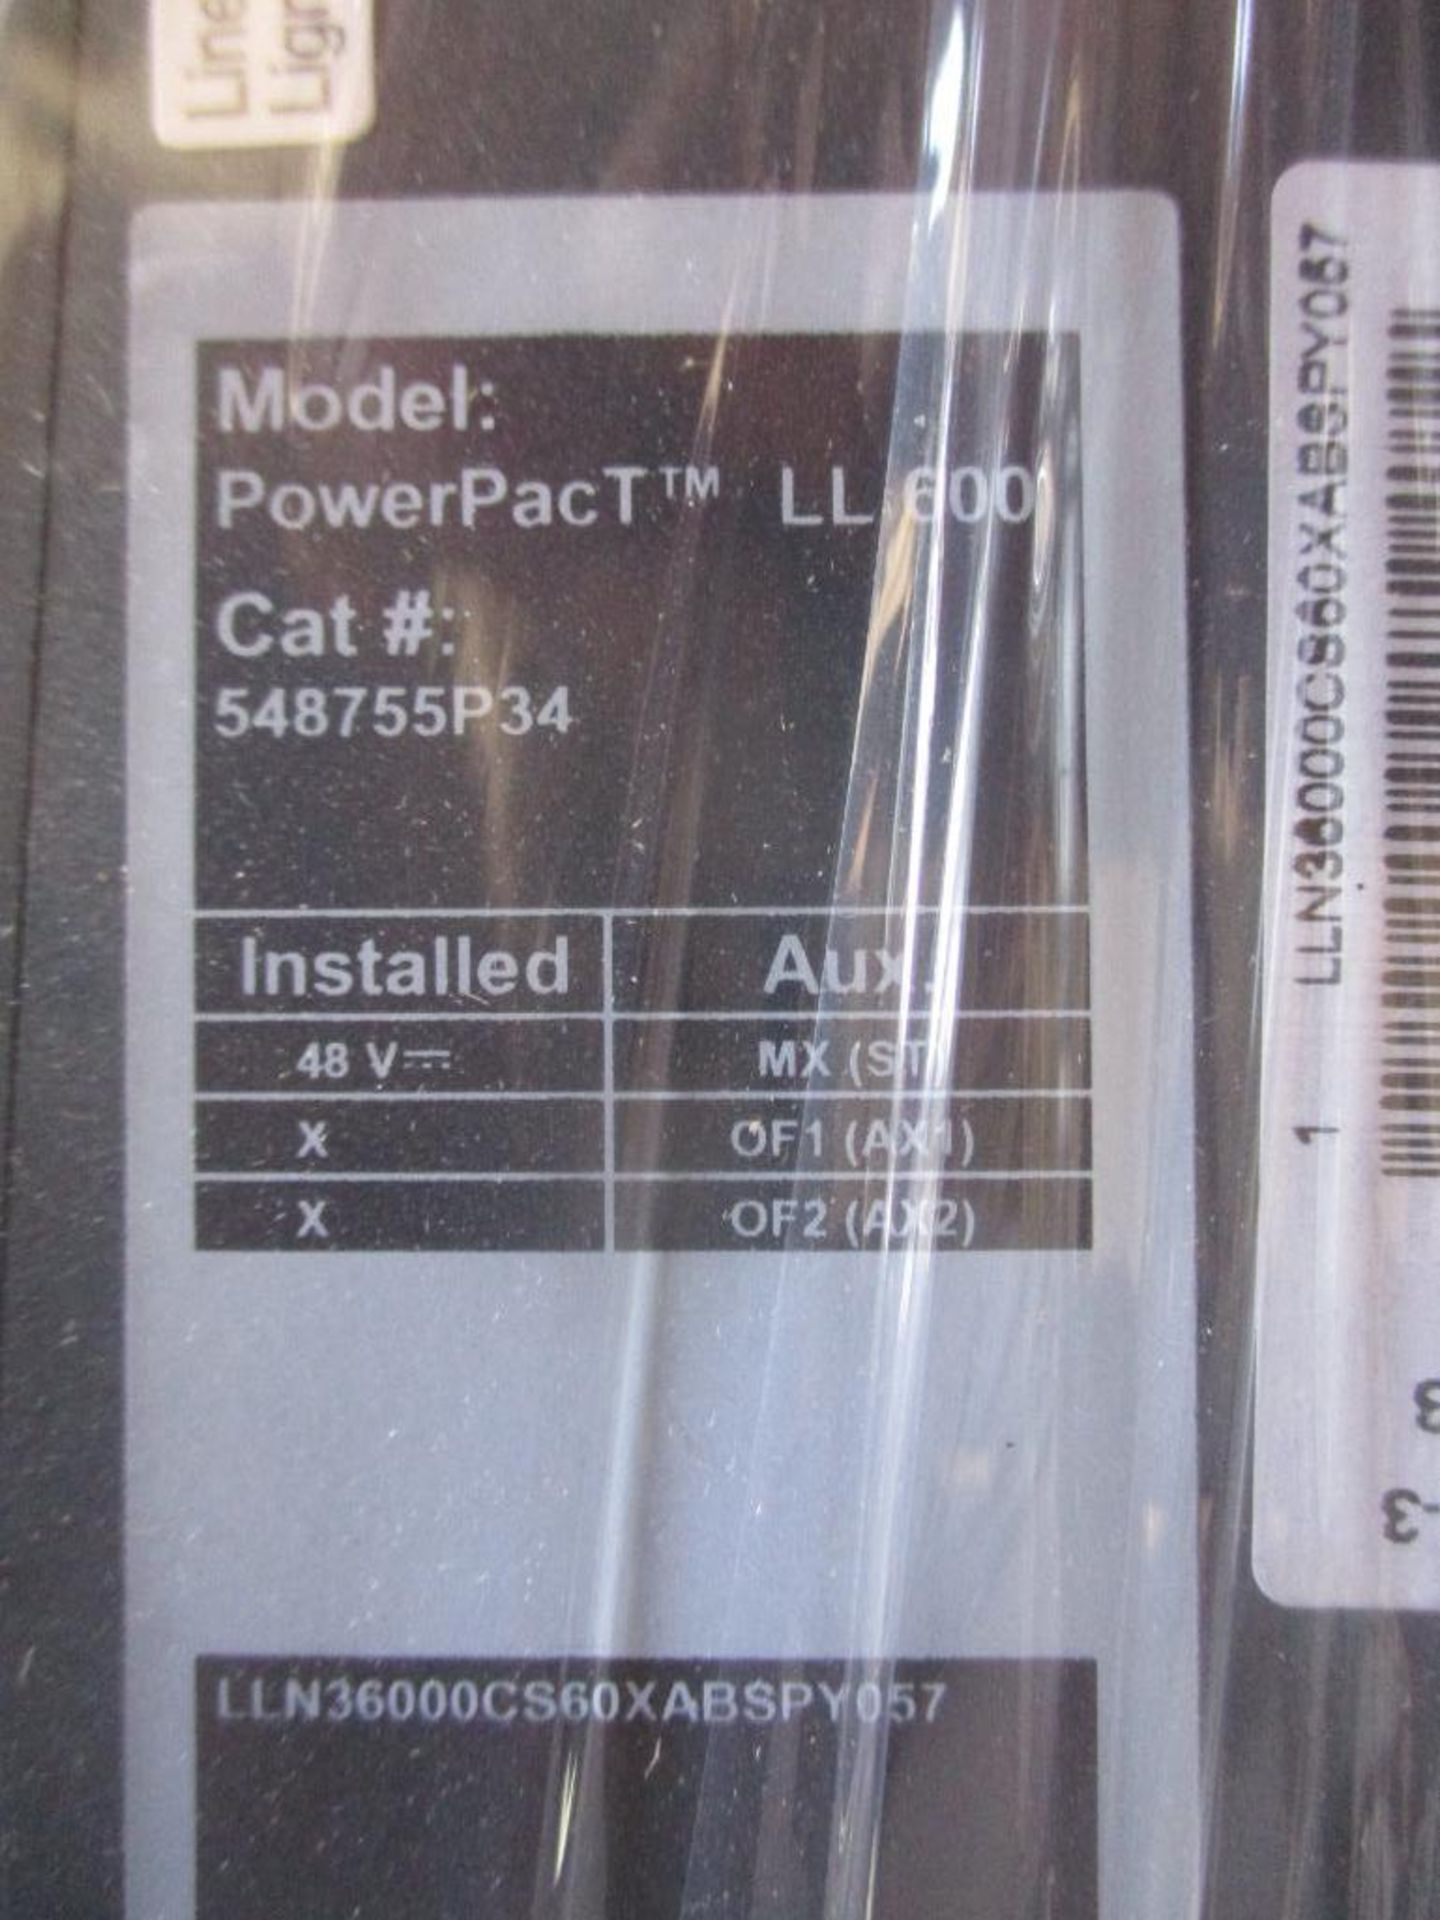 Square D 600 AMP Circuit Breaker, 548755P34, 600A, 3P, 600VAC, PowerPacT (New in Box) - Image 3 of 4